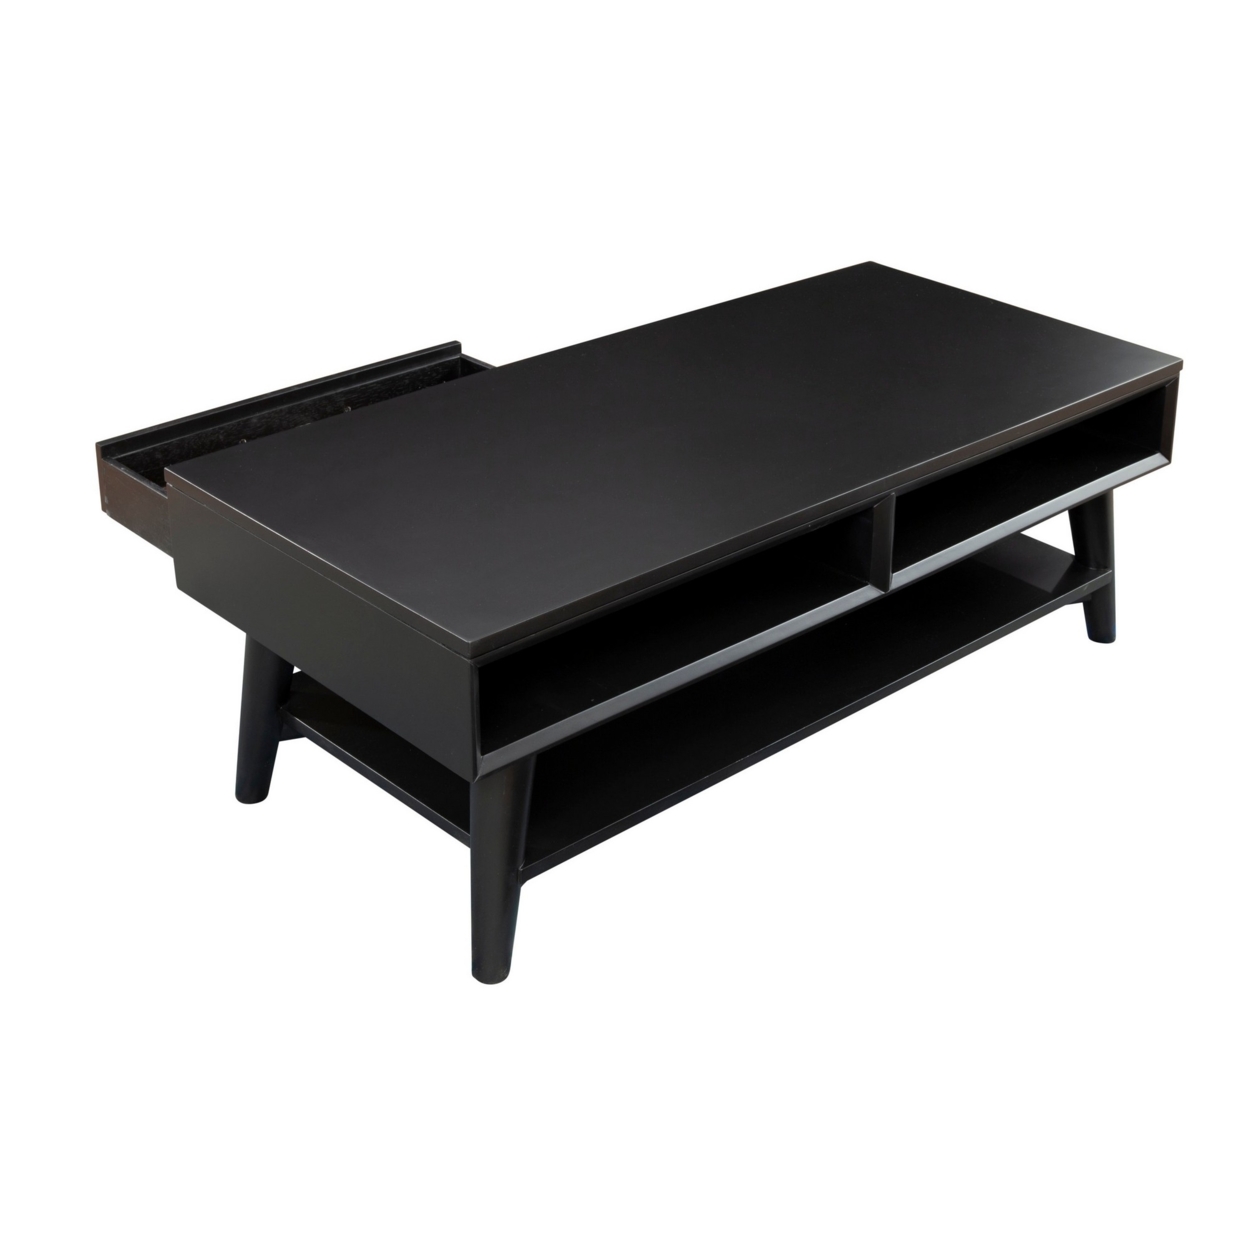 Coffee Table With 1 Drawer And Open Shelf, Black- Saltoro Sherpi